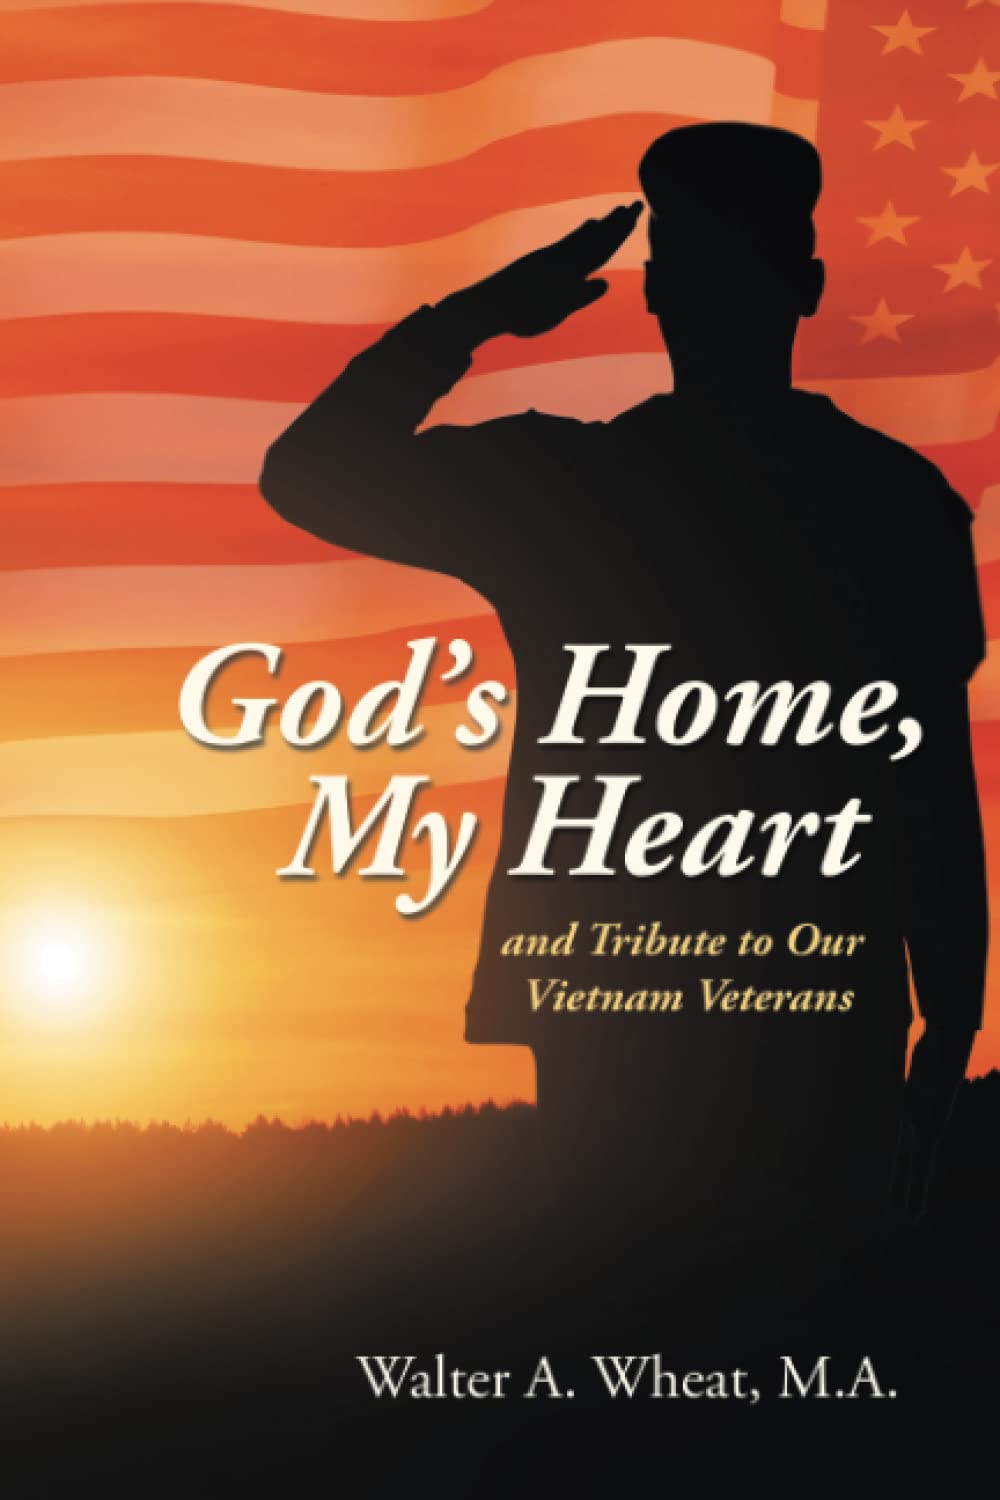 Walter A. Wheat promotes book, God’s Home, My Heart: and Tribute to Our Vietnam Veterans; supported by Author’s Tranquility Press